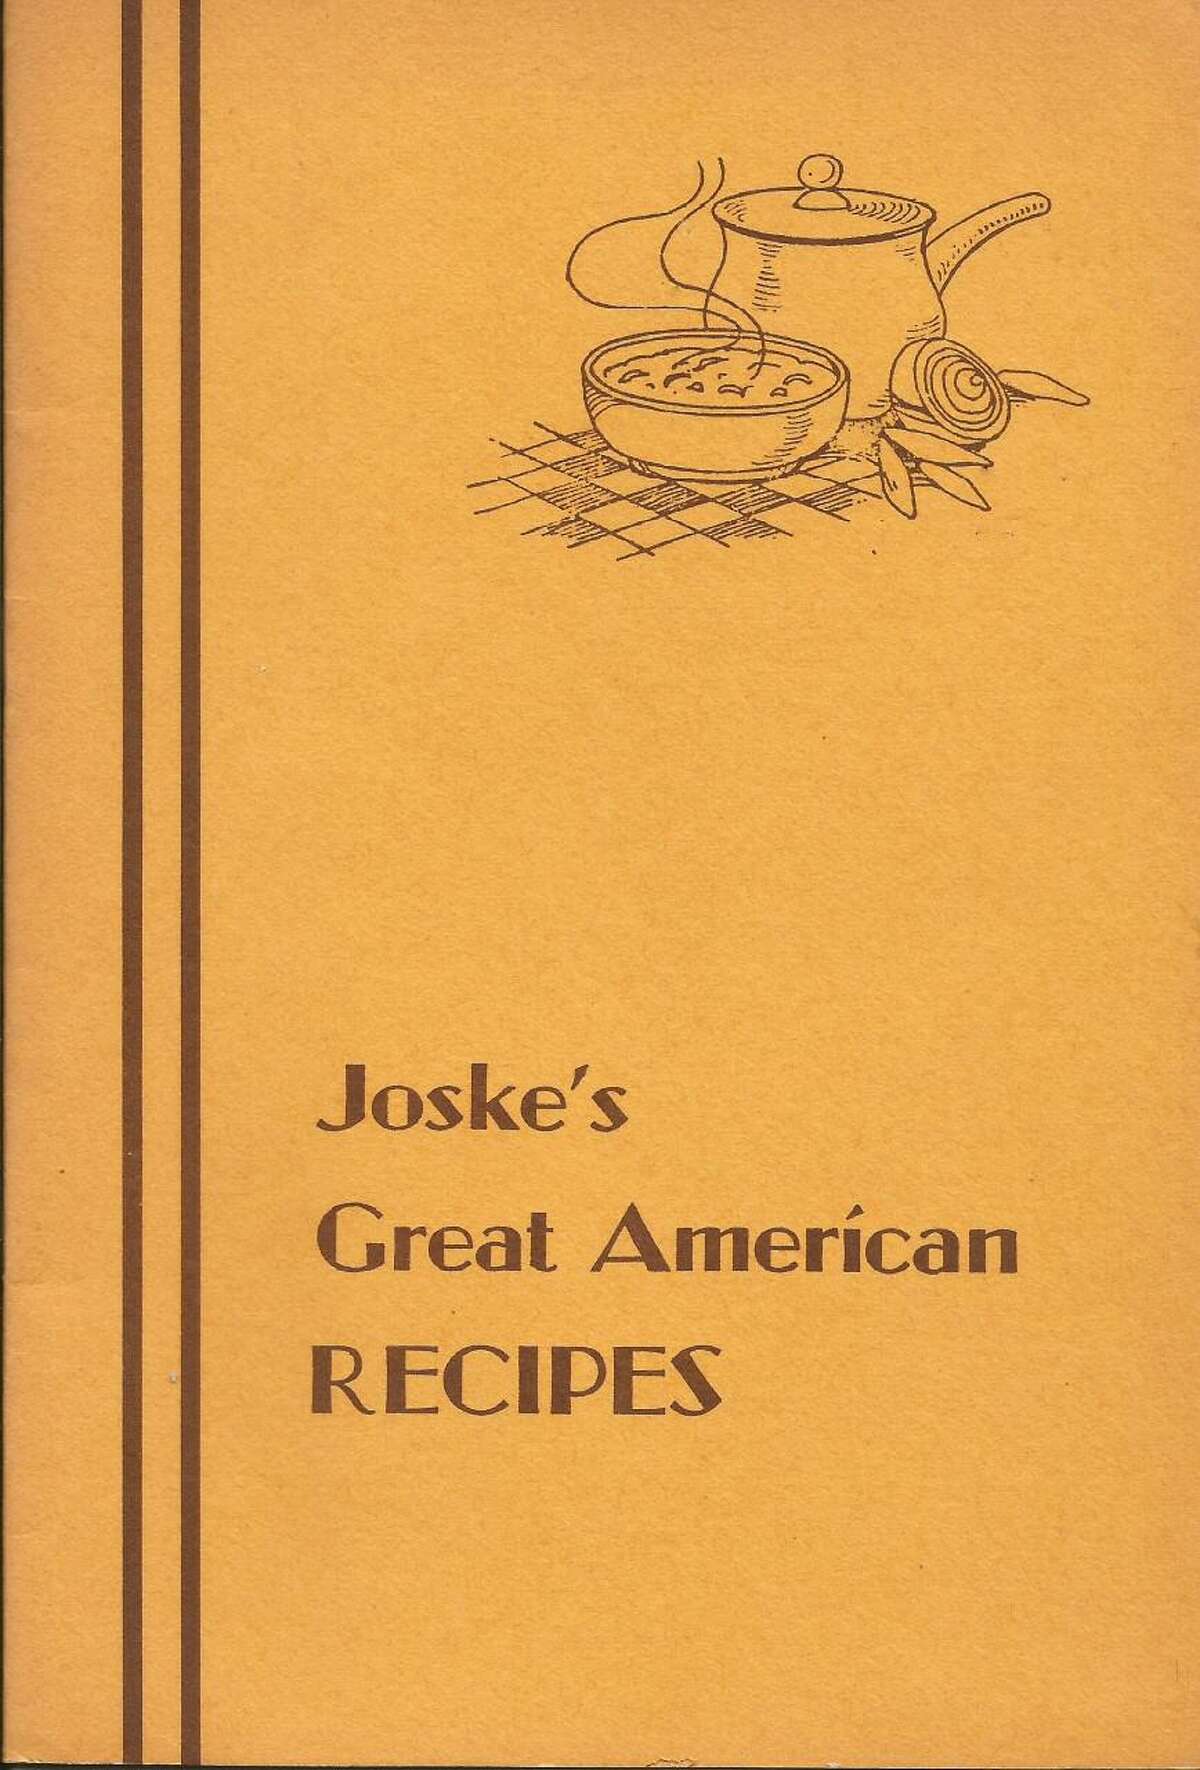 This photo shows the cover of a cookbook published by Joske's department store. Some speculate it may have been published in the 1970s, but it is undated and little is known about it. Joske's flagship store stood in downtown San Antonio on Alamo Plaza from 1888 until it closed in 1987.